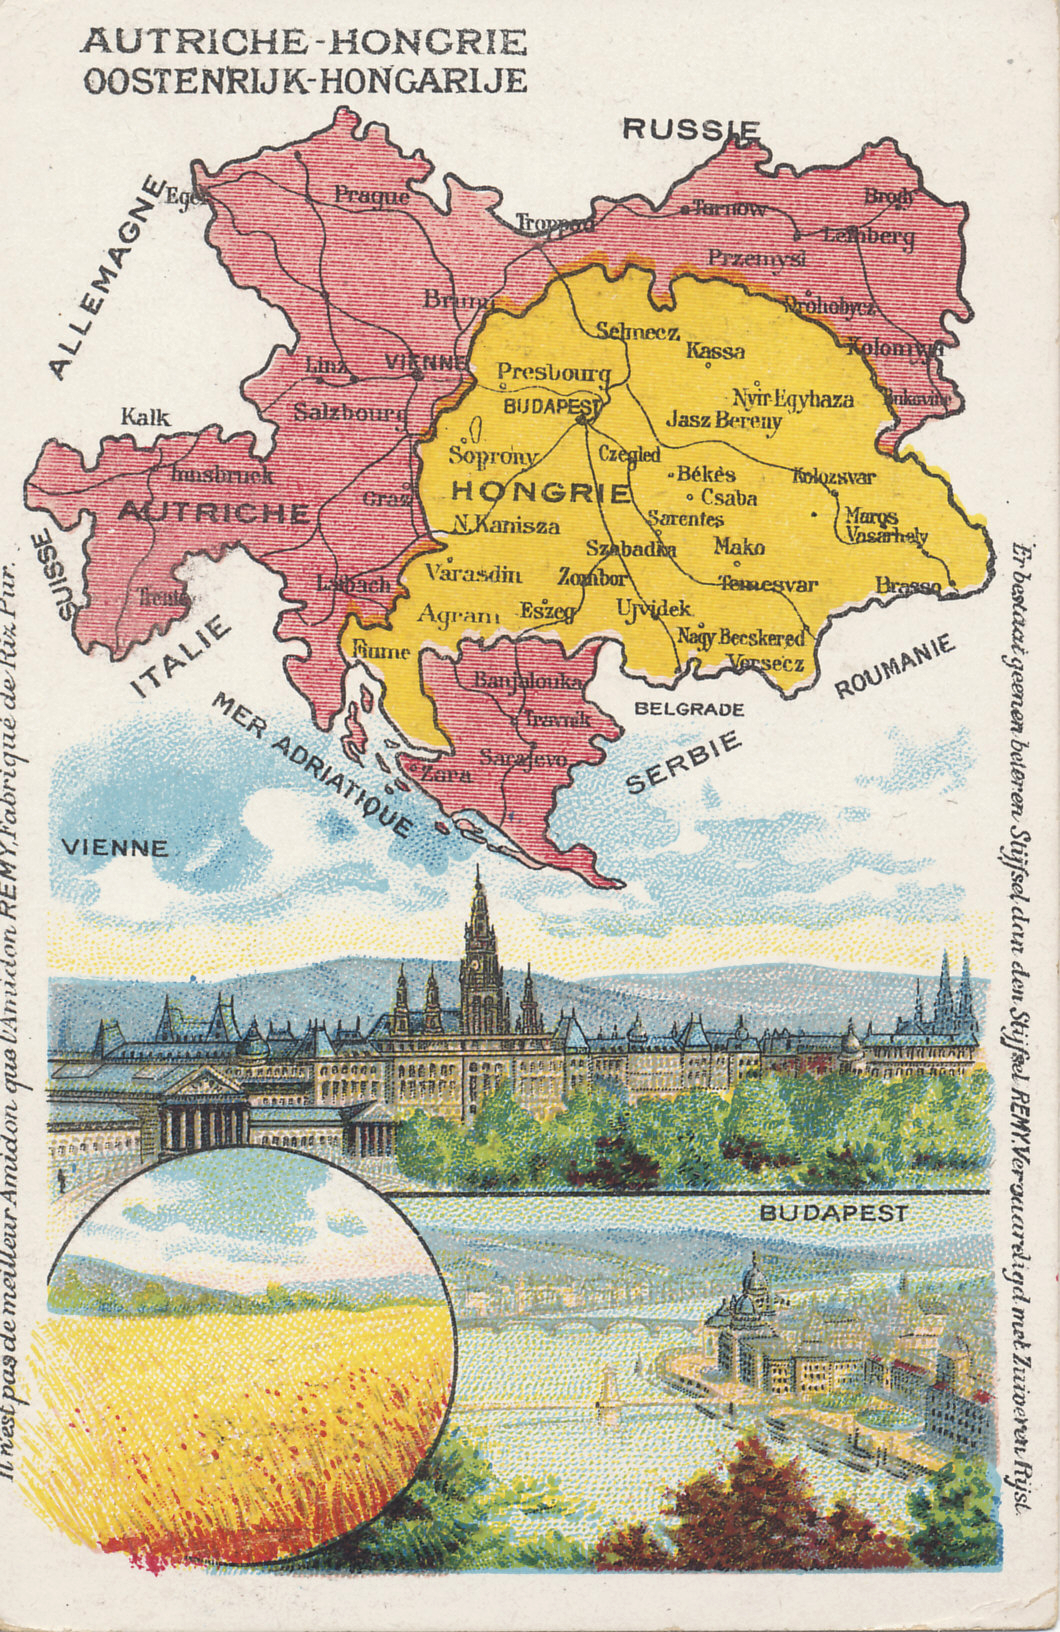 Advertising postcard map of Austria-Hungary from the Amidon Starch Company with images of Vienna, Budapest, and a wheat field.
Text in French and Dutch:
Demandez L'Amidon REMY en paquets de 1, 1/2 et 1/4 kg.
Vraagt het stijfsel REMY in pakken van 1, 1/2 et 1/4 ko.
Ask for REMY Starch in packages of 1, 1/2, and 1/4 kg.
Il n'est pas de meilleur Amidon que l'Amidon REMY, Fabrique de Riz Pur.
Er bestaat geenen beteren Stijfsel dan den Stijfsel REMY, Vervaardigd met Zuiveren Rijst.
There is no better starch than Remy Starch, made of pure rice.